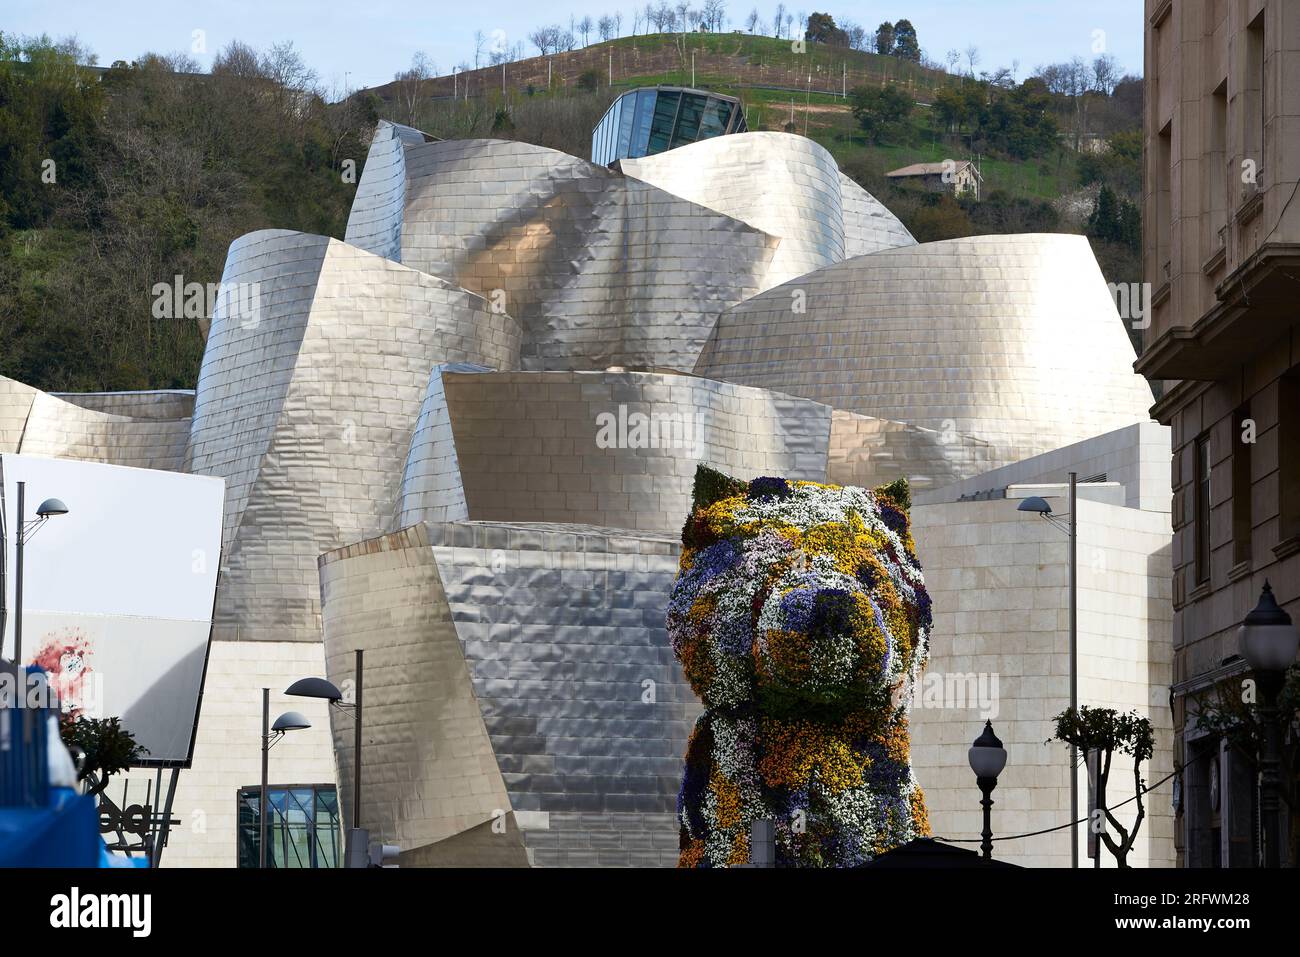 The Puppy by Jeff Koons and the Guggenheim Museum, Bilbao, Bizkaia, Biscay, Basque Country, Euskadi, Euskal Herria, Spain, Europe. Stock Photo